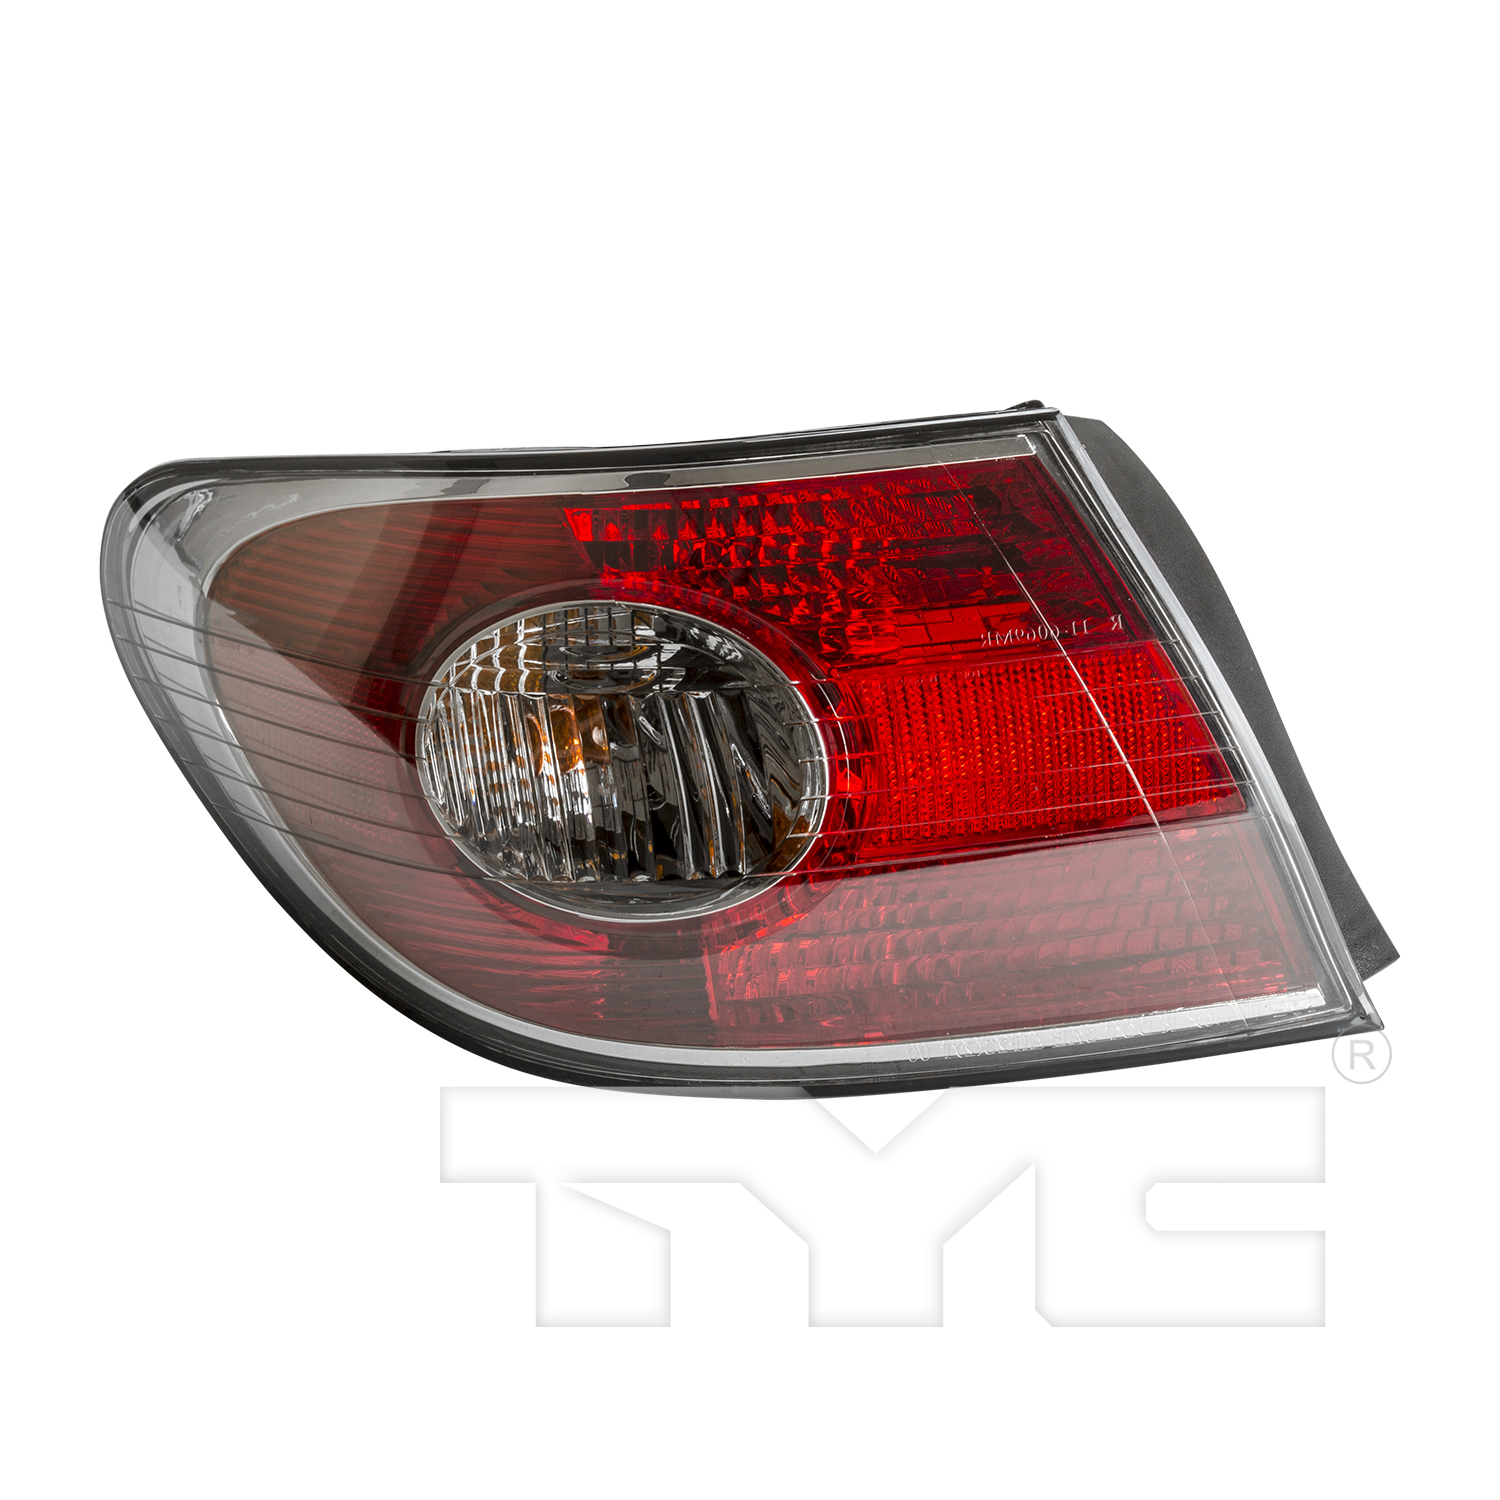 Aftermarket TAILLIGHTS for LEXUS - ES330, ES330,04-04,LT Taillamp assy